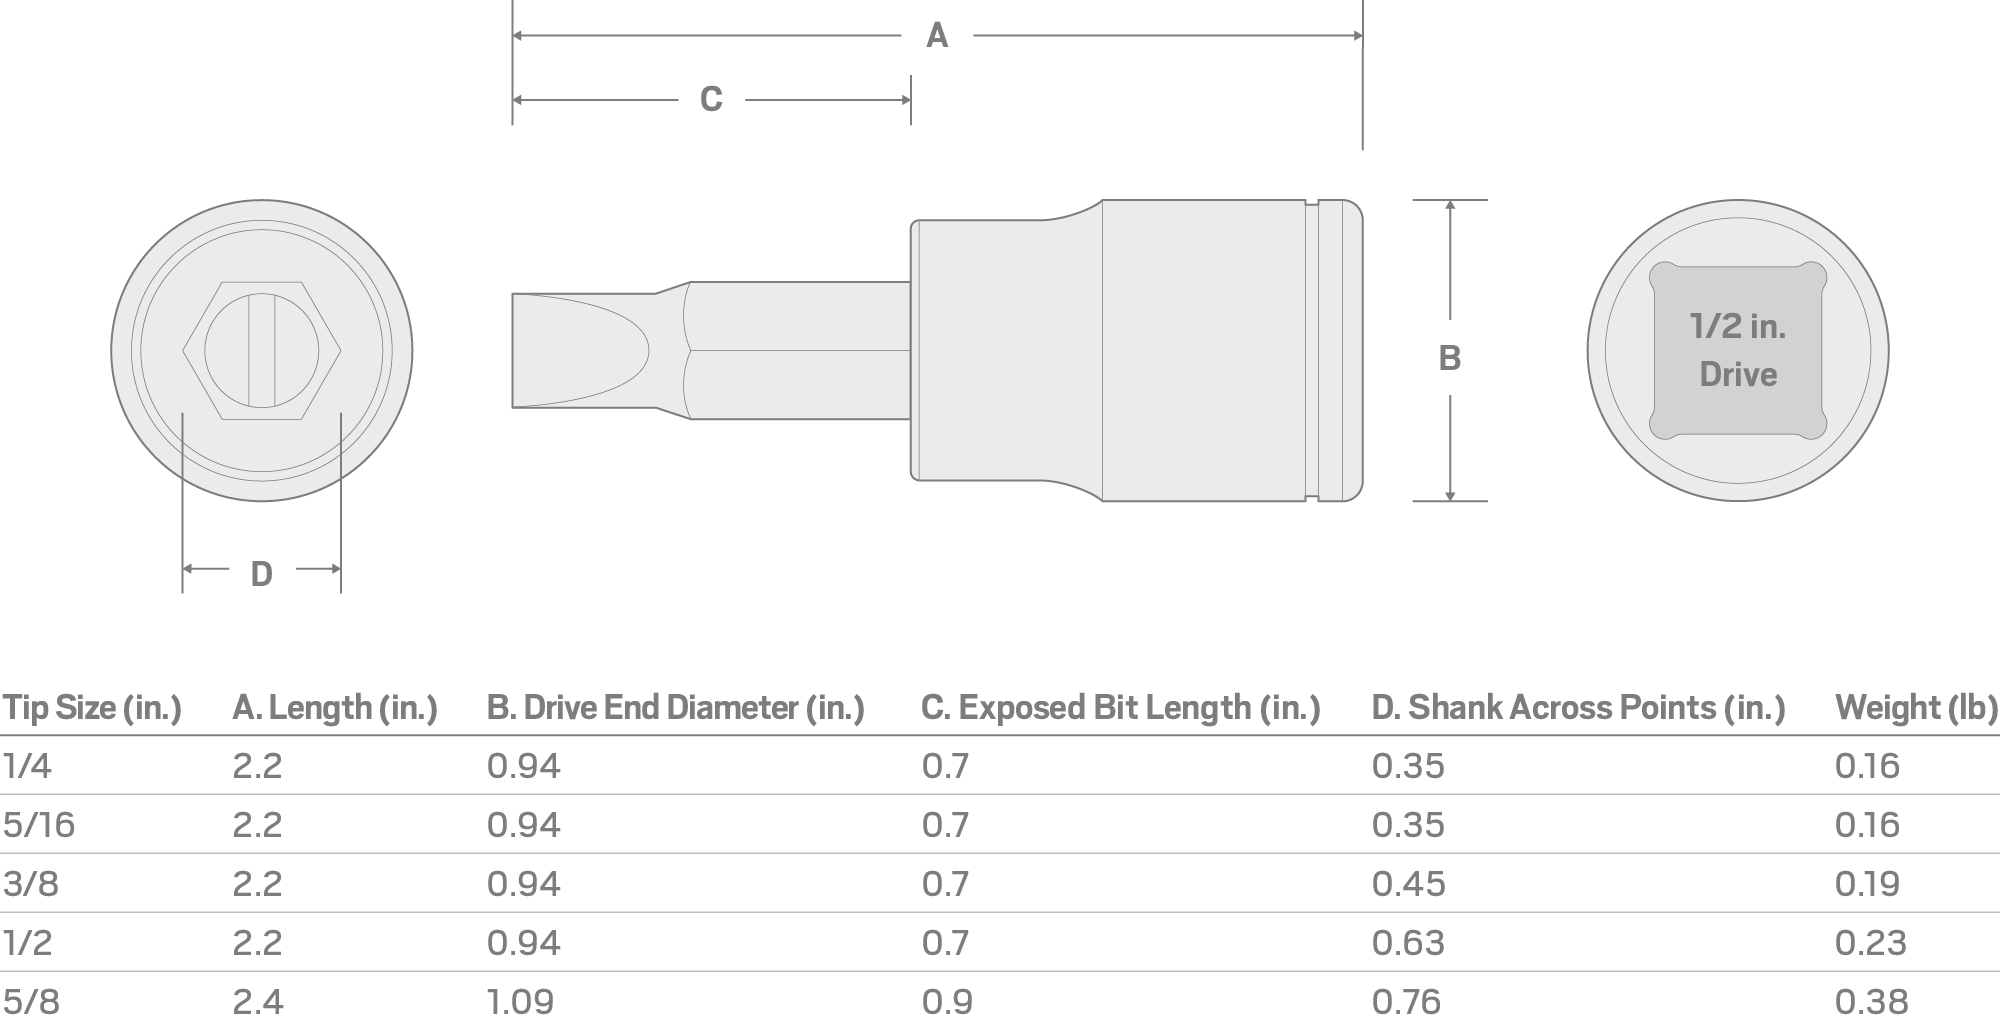 Specs for 1/2 Inch Drive x 1/4 Inch Slotted Bit Socket